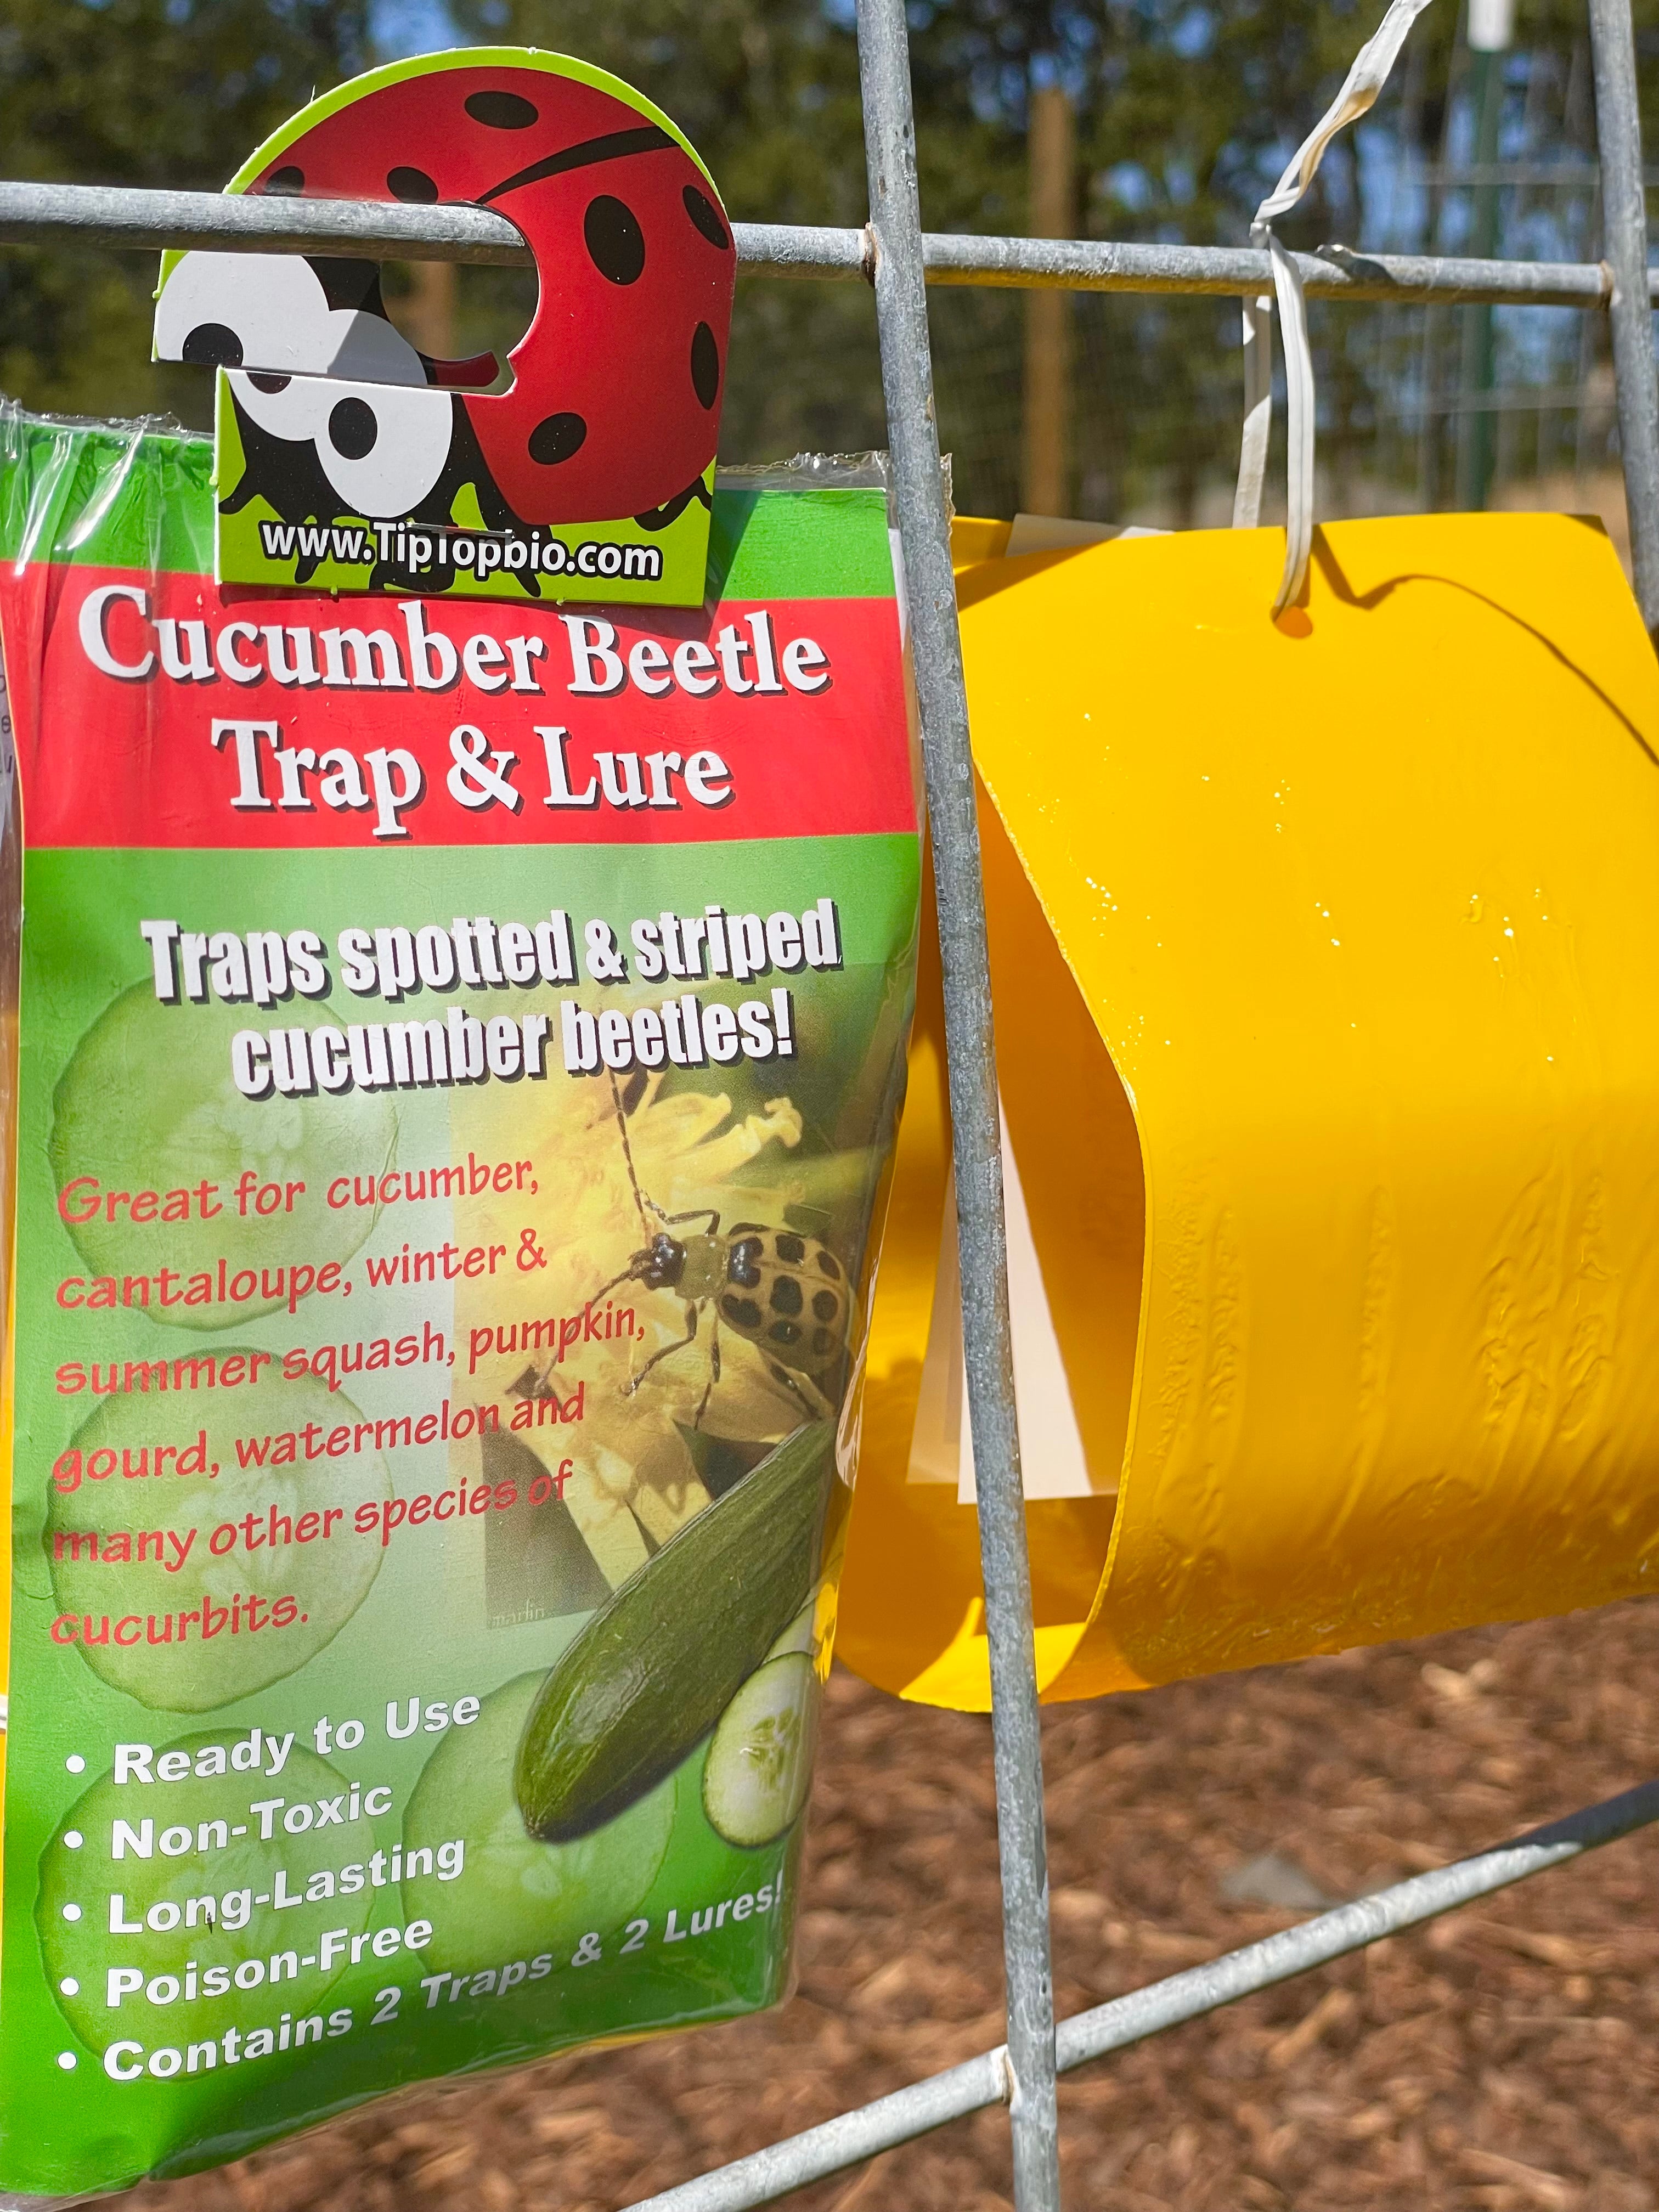 Cucumber Beetle Trap & Lure - 2 Pack